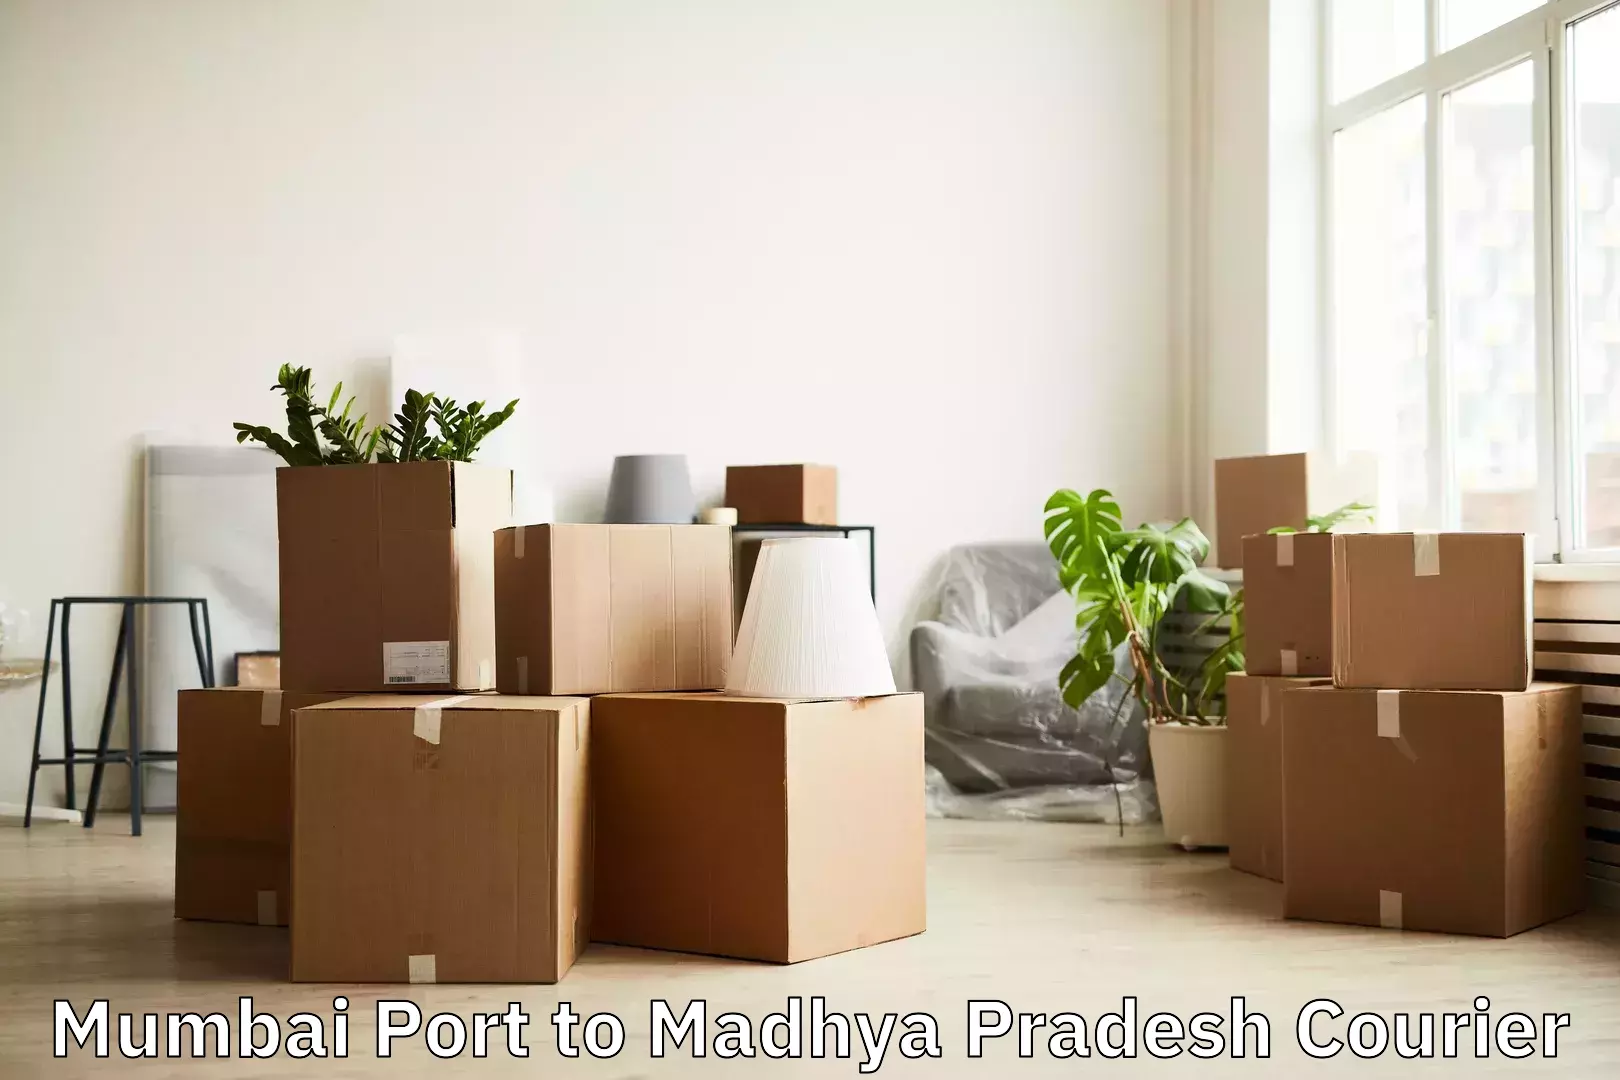 Luggage delivery providers Mumbai Port to BHEL Bhopal